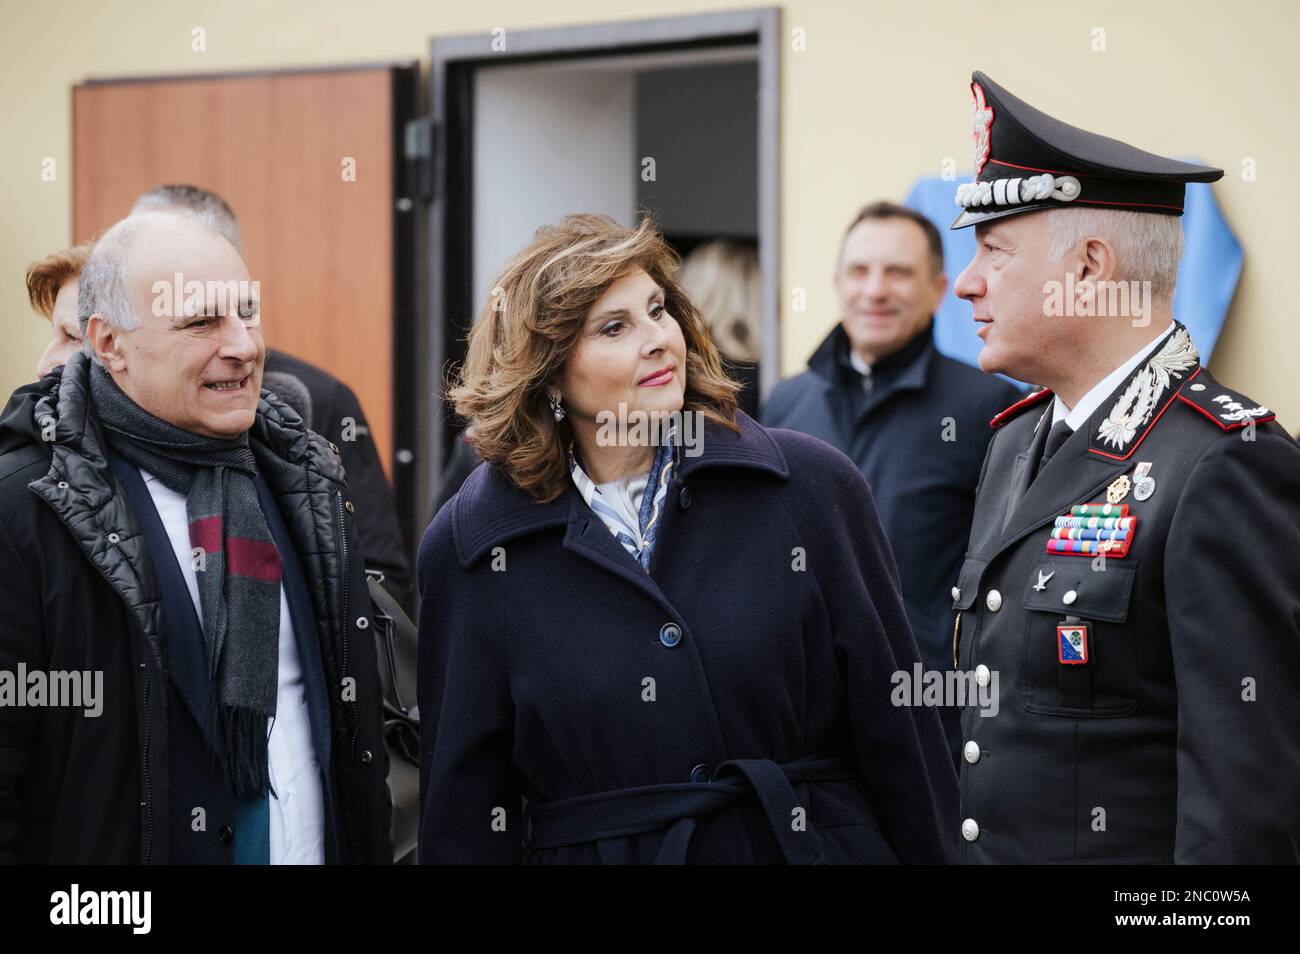 Vittoria Ciaramella (C), Cosenza’s Prefect, seen with security forces at DIA. The Italian Minister of Interior Matteo Piantedosi attended the inauguration of the operative Anti-mafia Investigation Department (DIA - Direzione Investigativa Antimafia) The Minister also attended the provincial meeting for order and public security and the signature for a protocol for re-usage of buildings and assets seized from organise crime. (Photo by Valeria Ferraro /SOPA Images/Sipa USA) Stock Photo